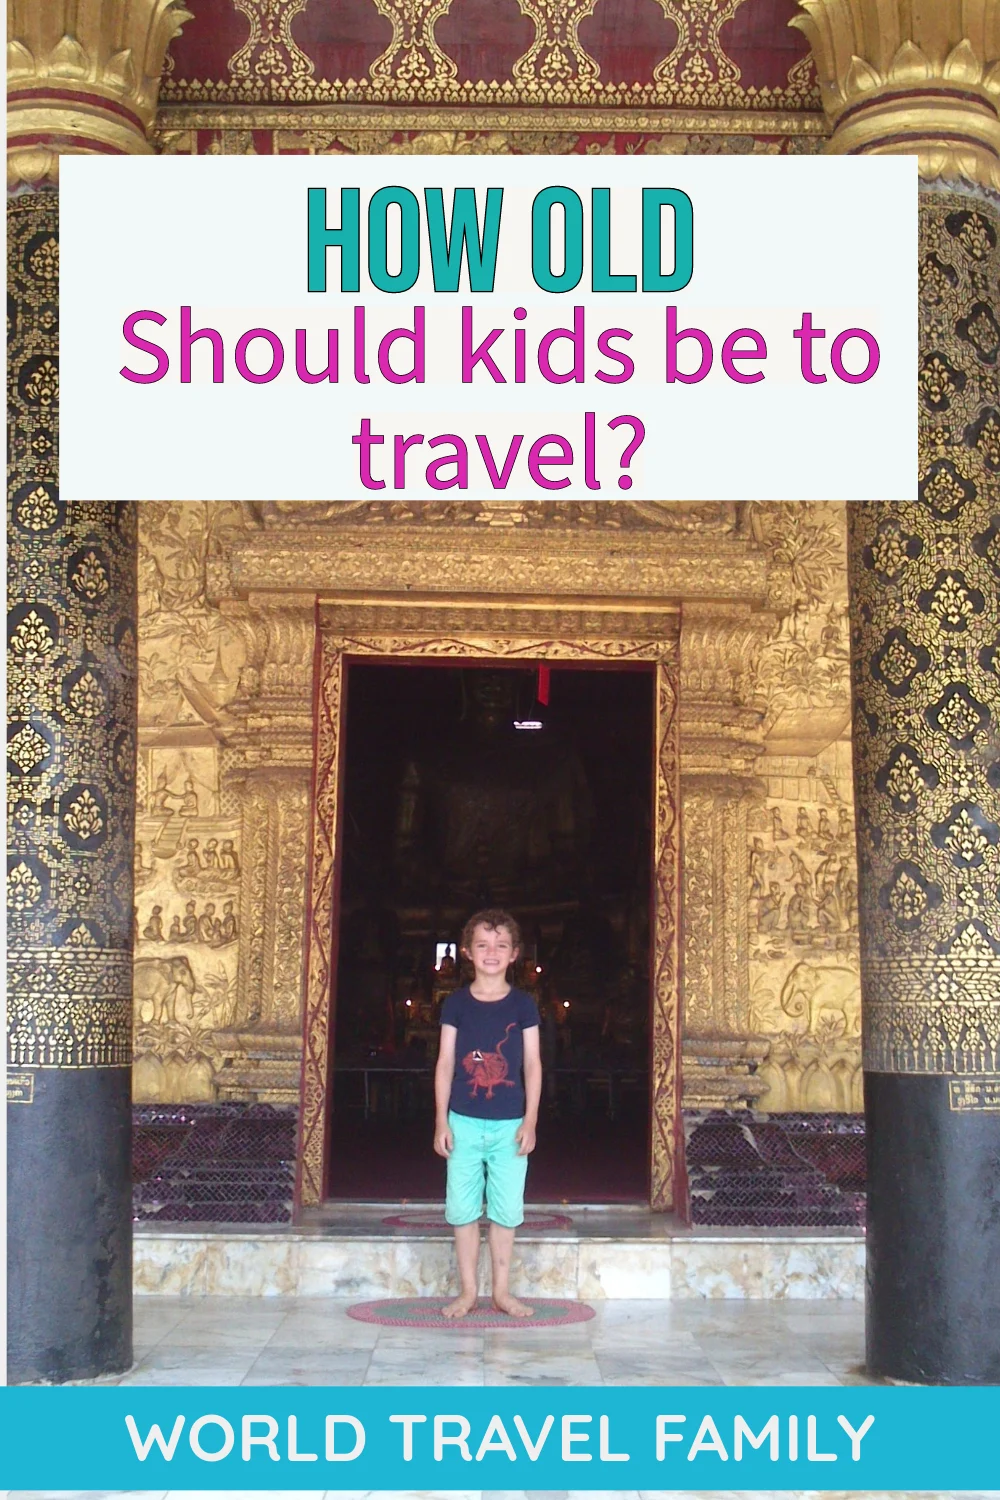 How old should kids be to travel 6 years old.